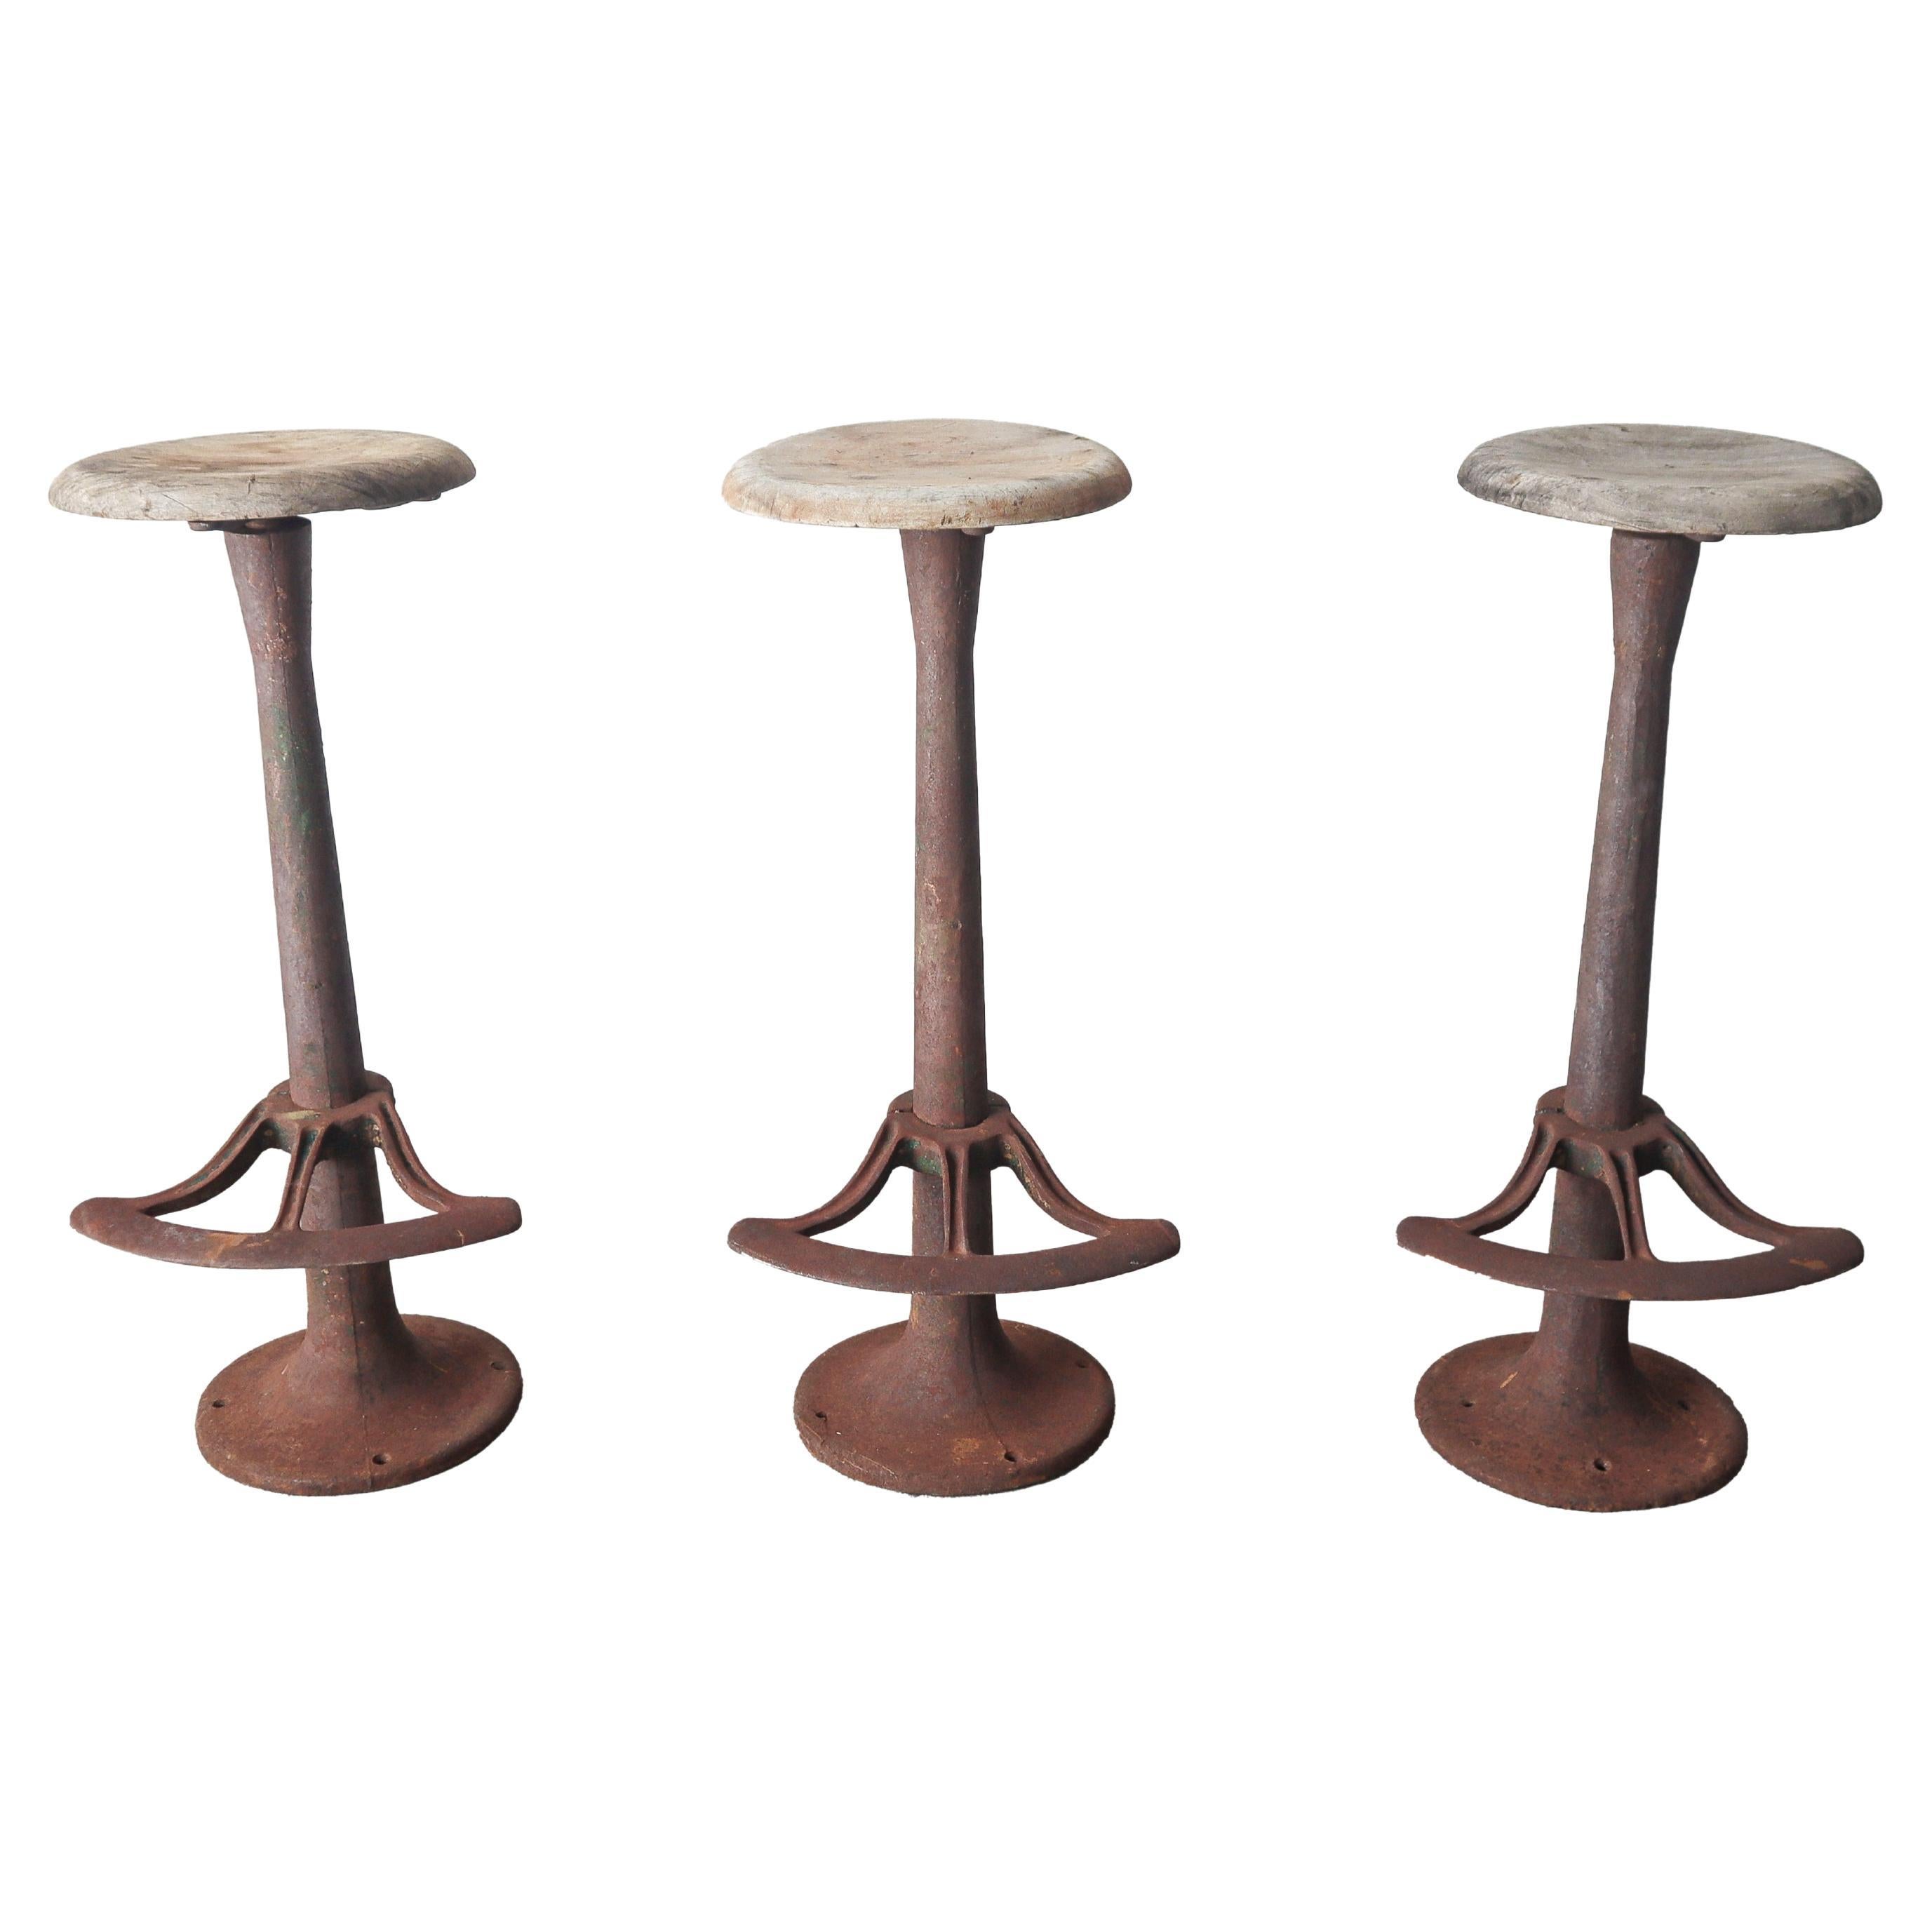 Set of 3 Antique Industrial Swivel Barstools For Sale